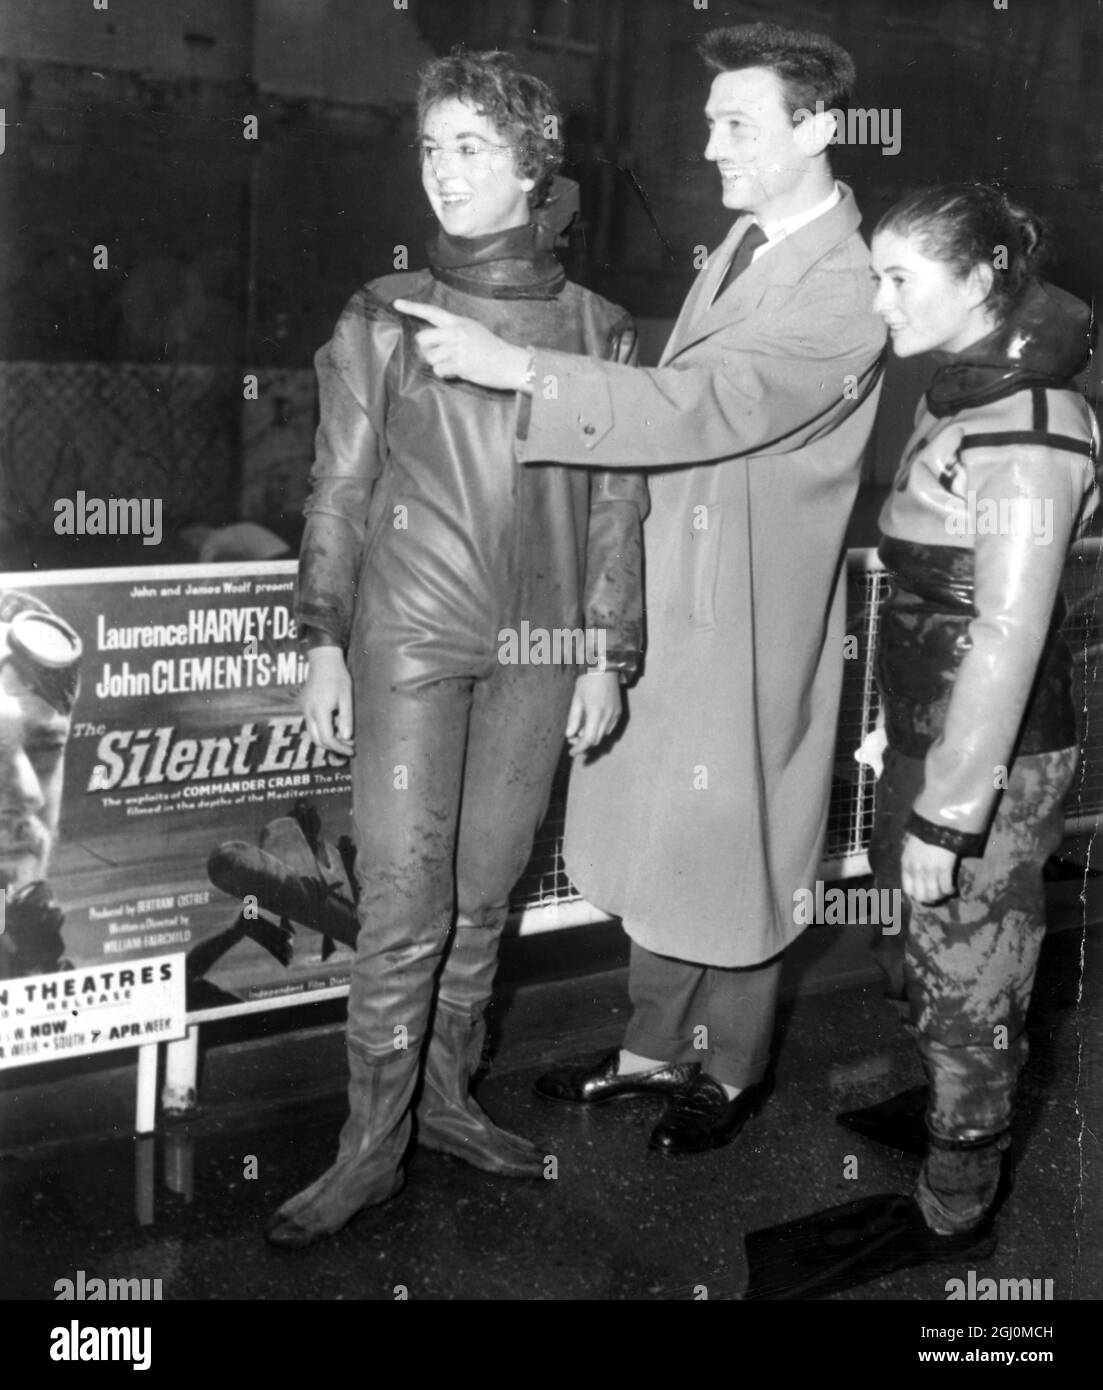 London England Exhibition Underwater Equipment 25 year old Rowena Ker of Stourbridge Worcestershire in frogman outfit with club member Paddy Mangin and film and stage actor Laurence Harvey . 25 March 1958 Stock Photo